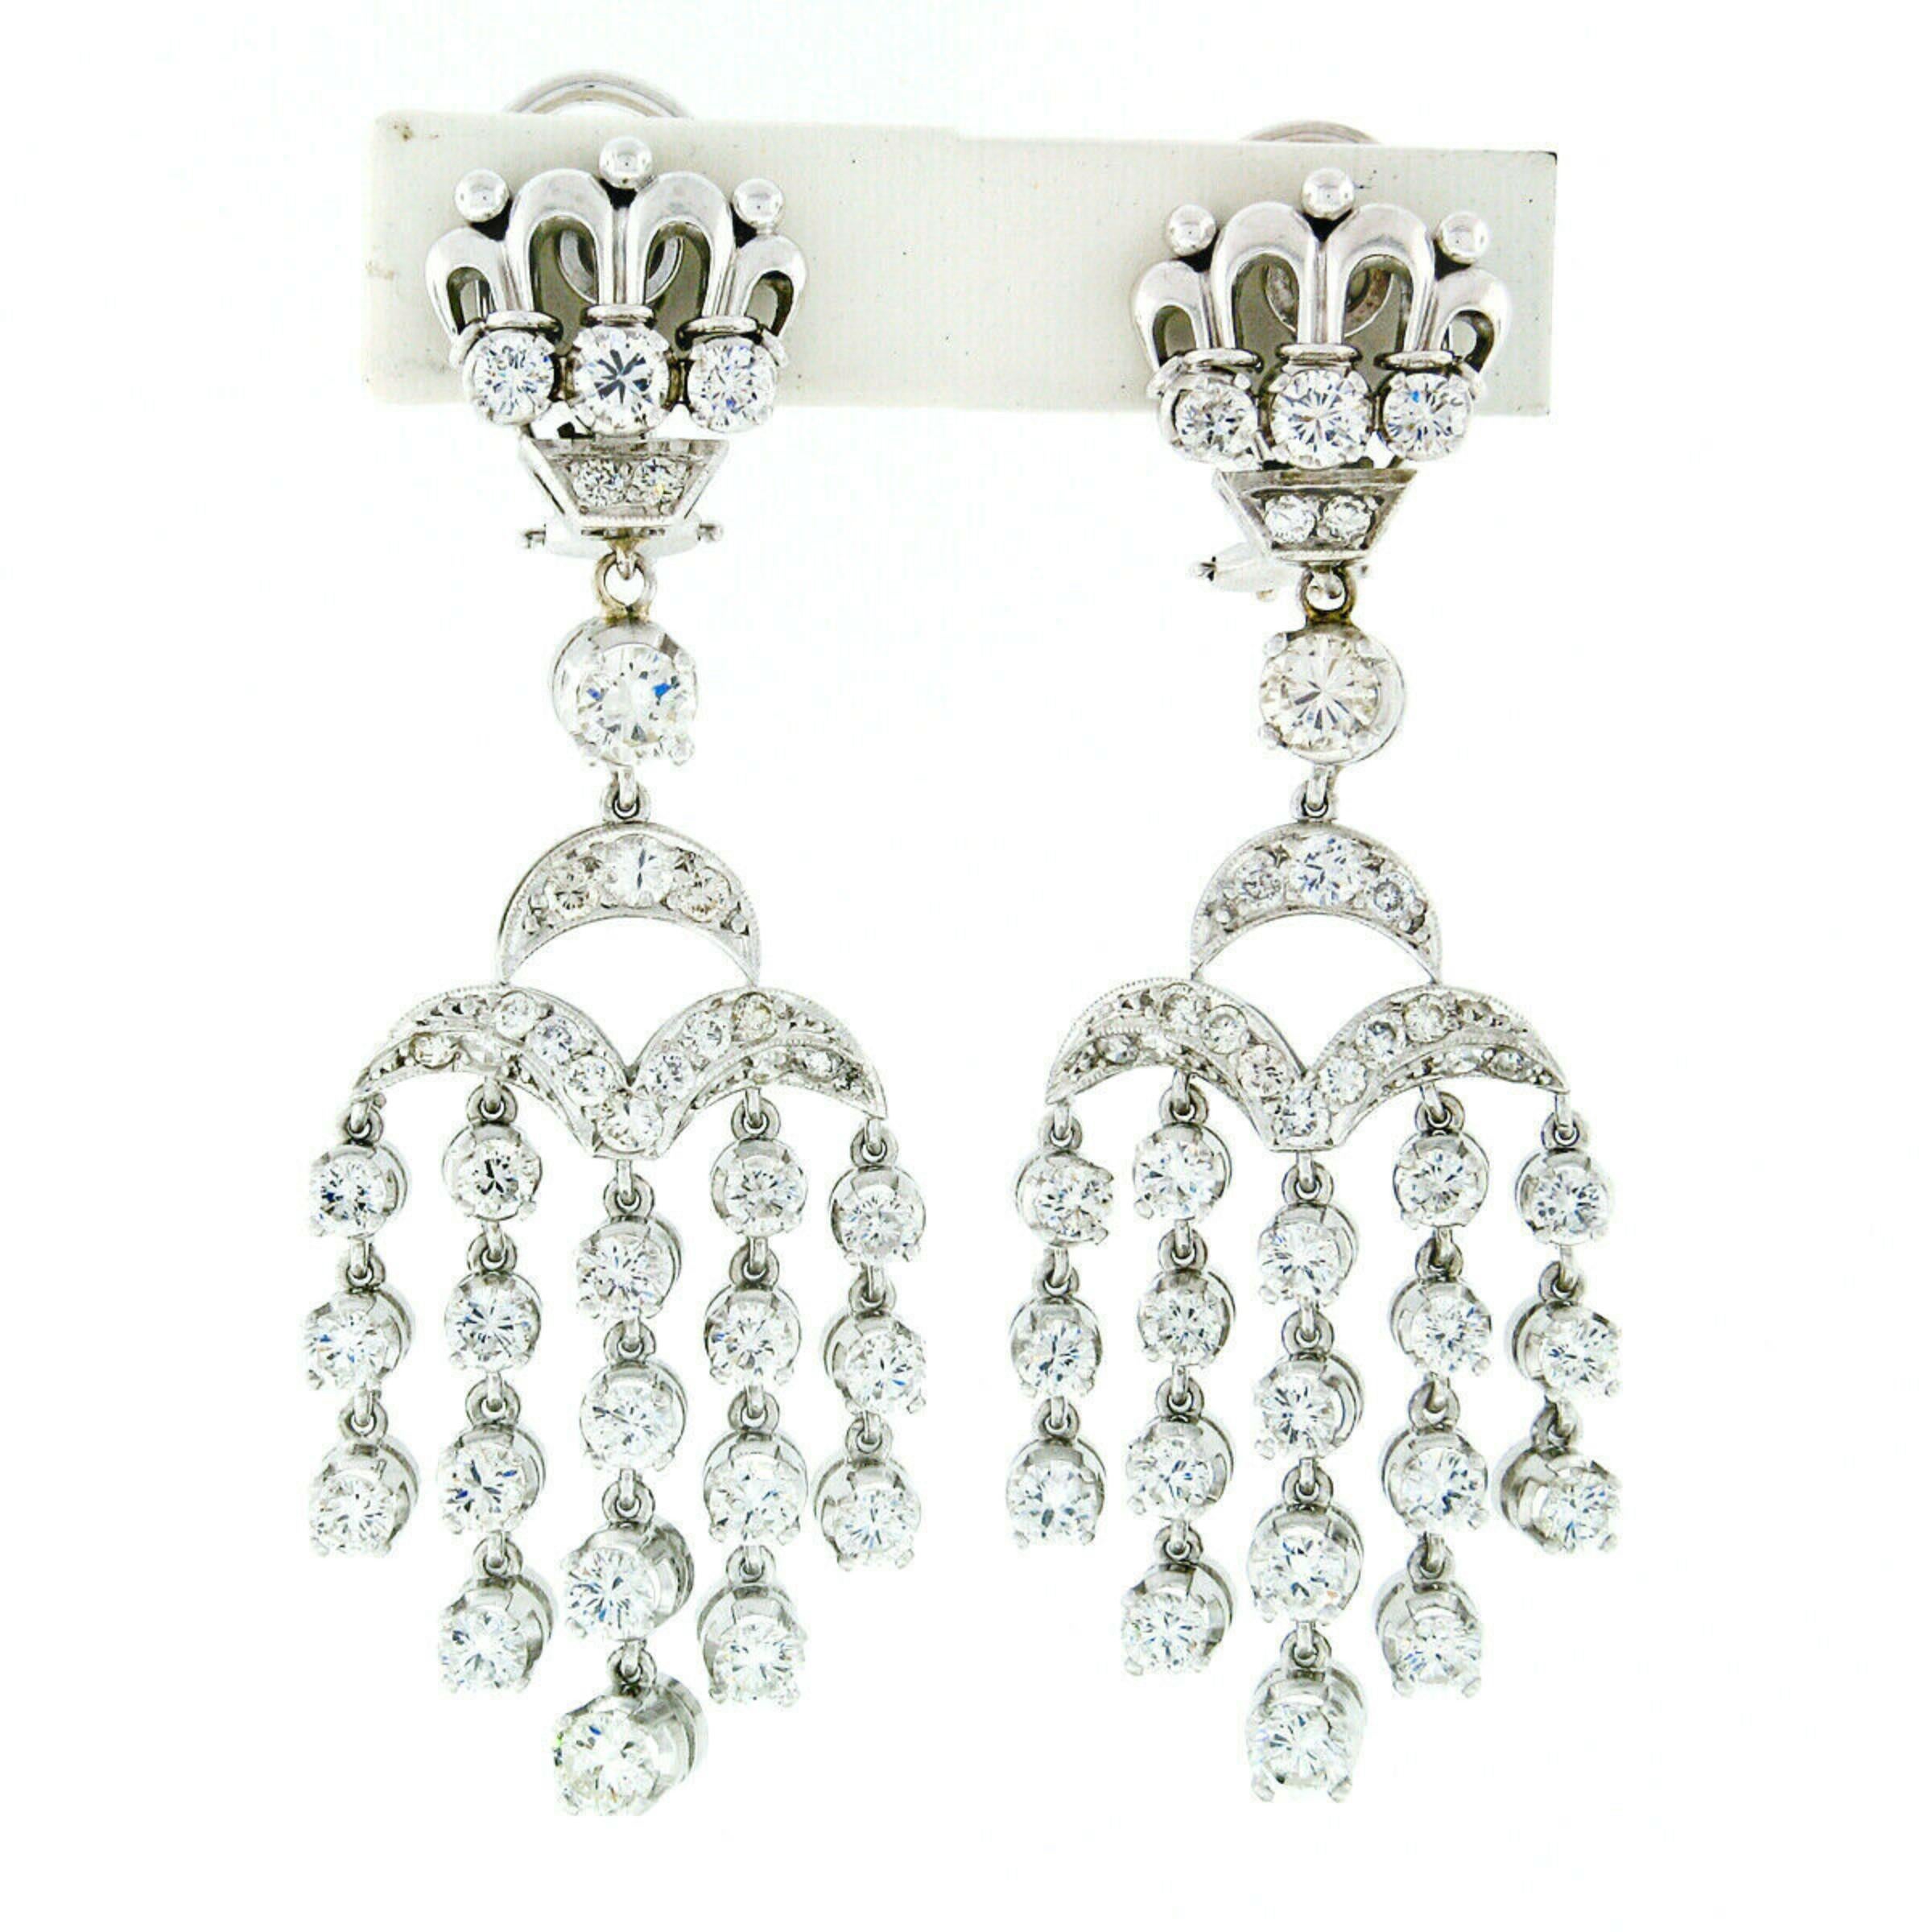 You are looking at a breathtaking pair of chandelier dangle earrings that were crafted from solid 18k white gold and set with approximately 5.38 carats of very fine quality diamonds. The dangling strands of diamonds are very flexible and flow